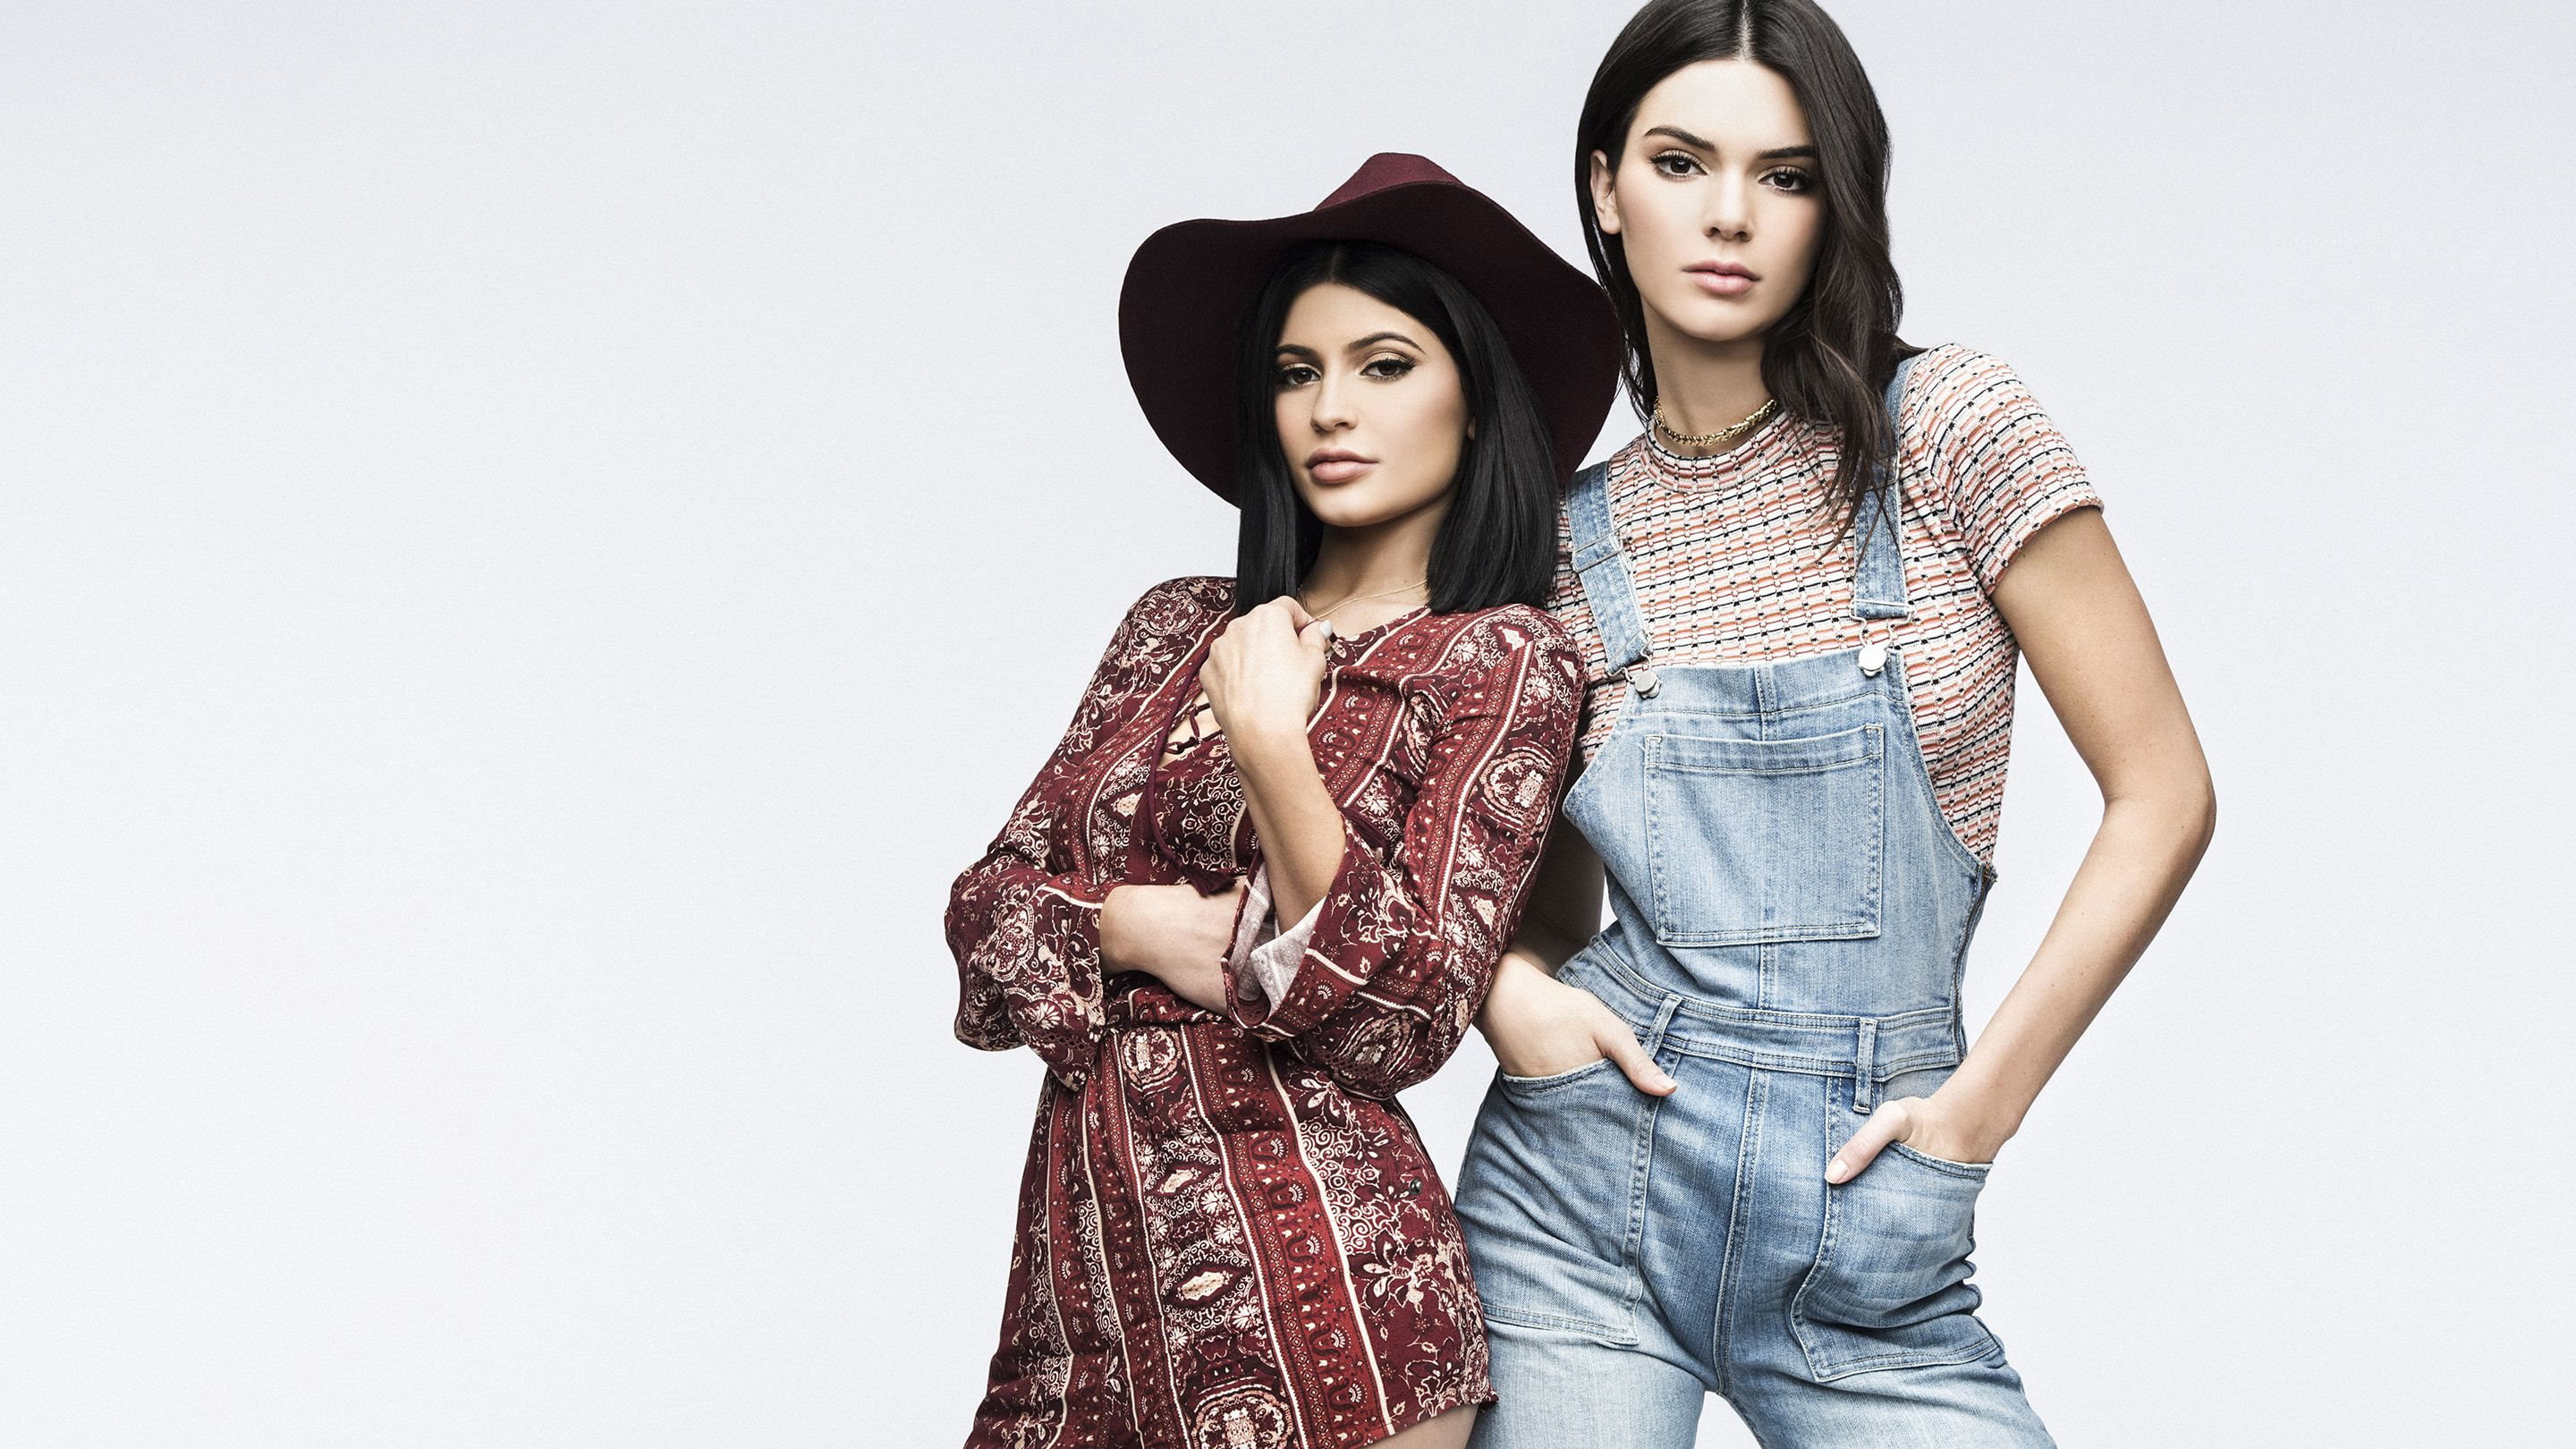 2016, Kylie Jenner, Kendall Jenner, PacSun, Sisters, Photoshoot